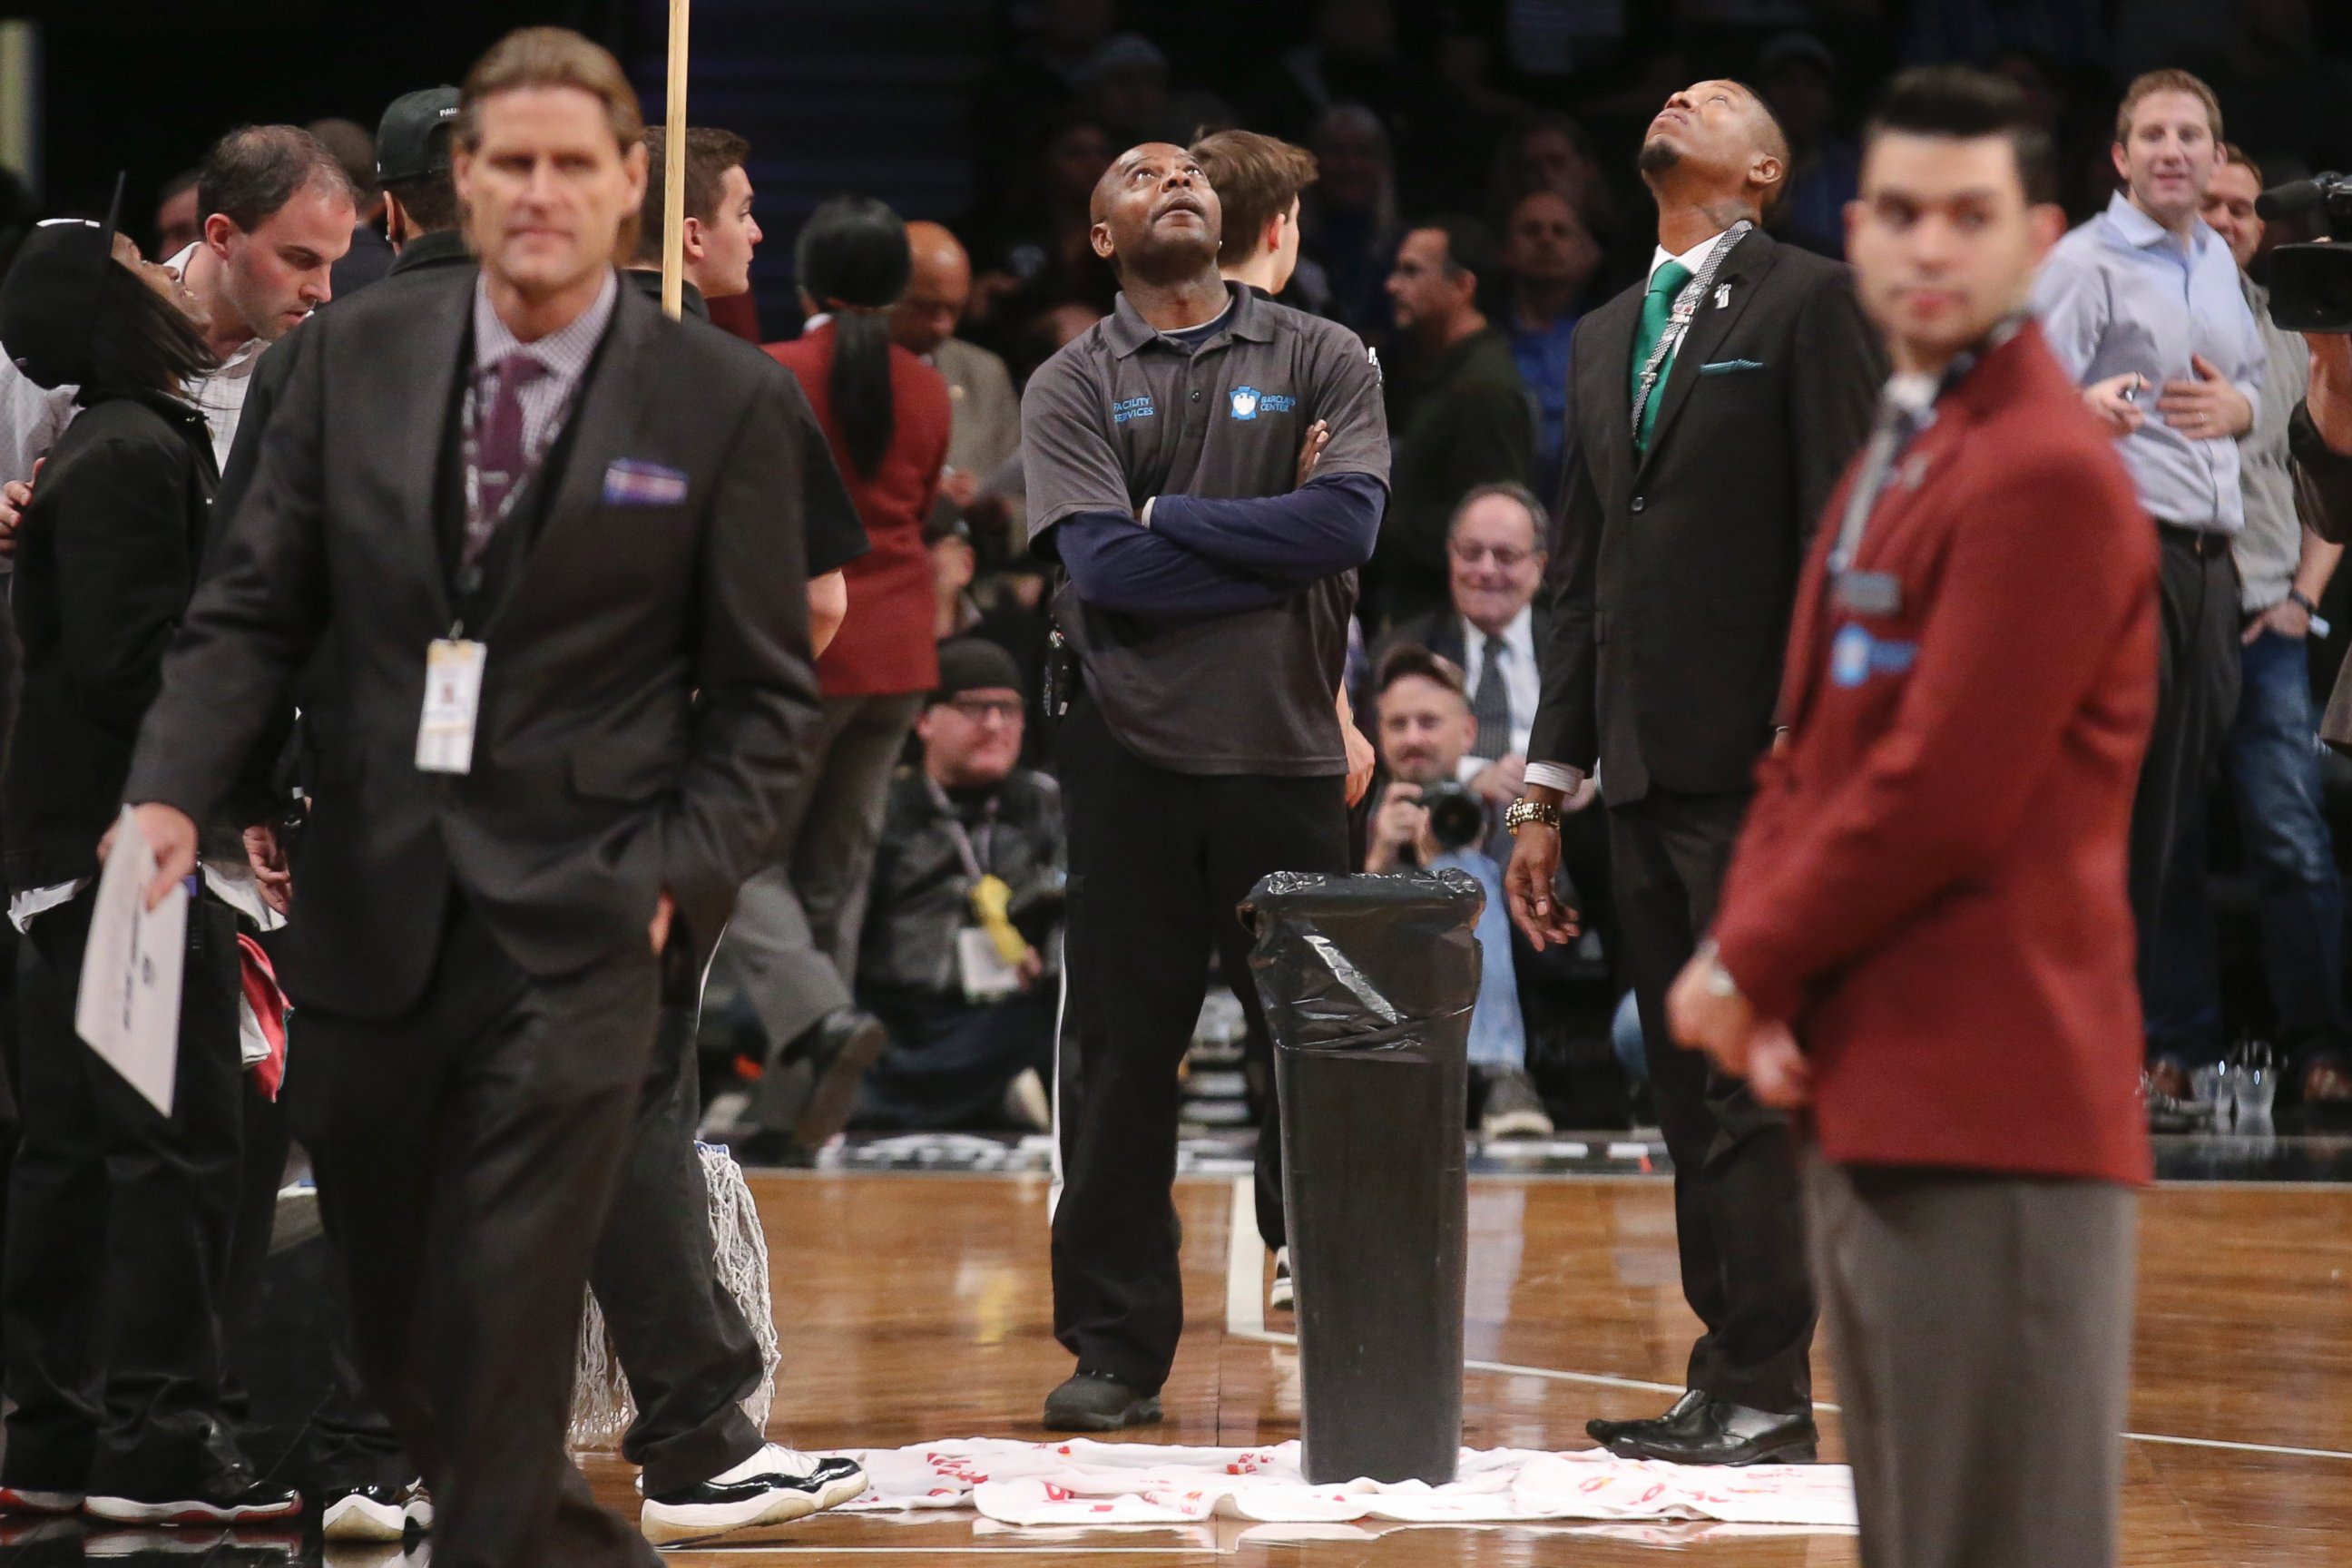 PHOTO: Floor attendants look up at a roof leak causing a delay in the first half an NBA basketball game between the Brooklyn Nets and Miami Heat at the Barclays Center, Dec. 16, 2014, in New York.